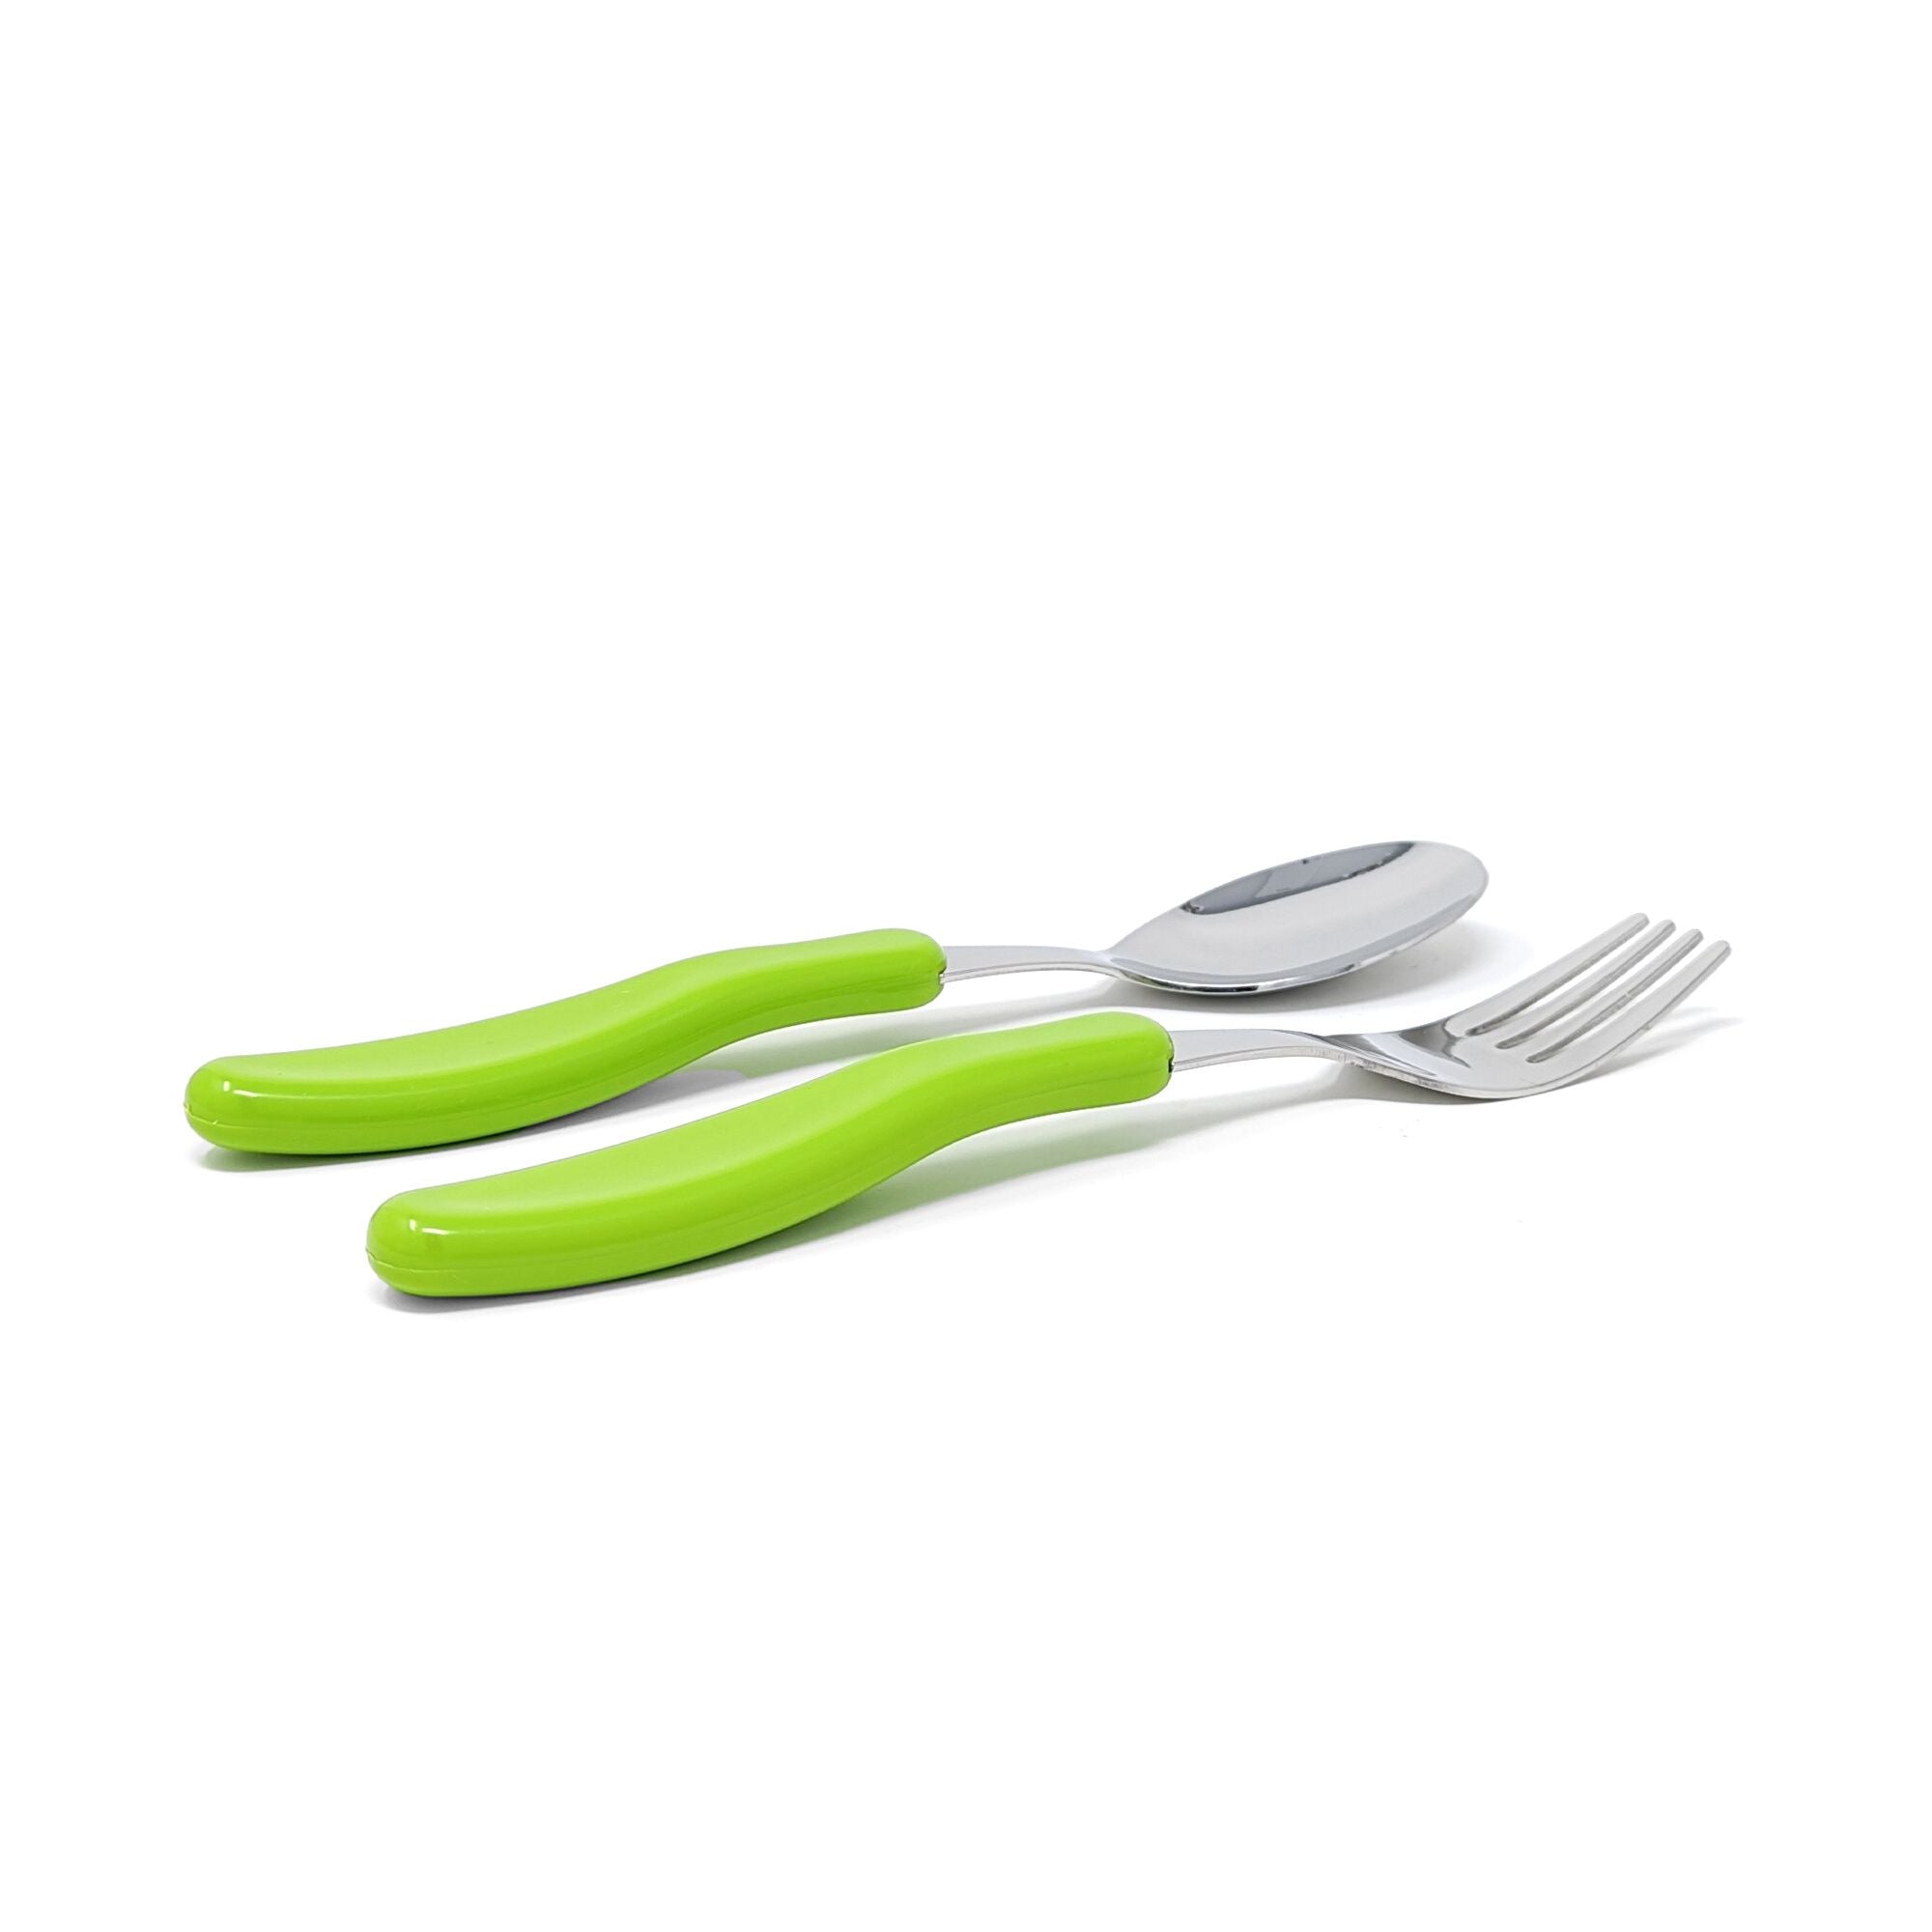 Baby Utensils Spoons Forks Sets With Travel Safe Case, Easy Grip